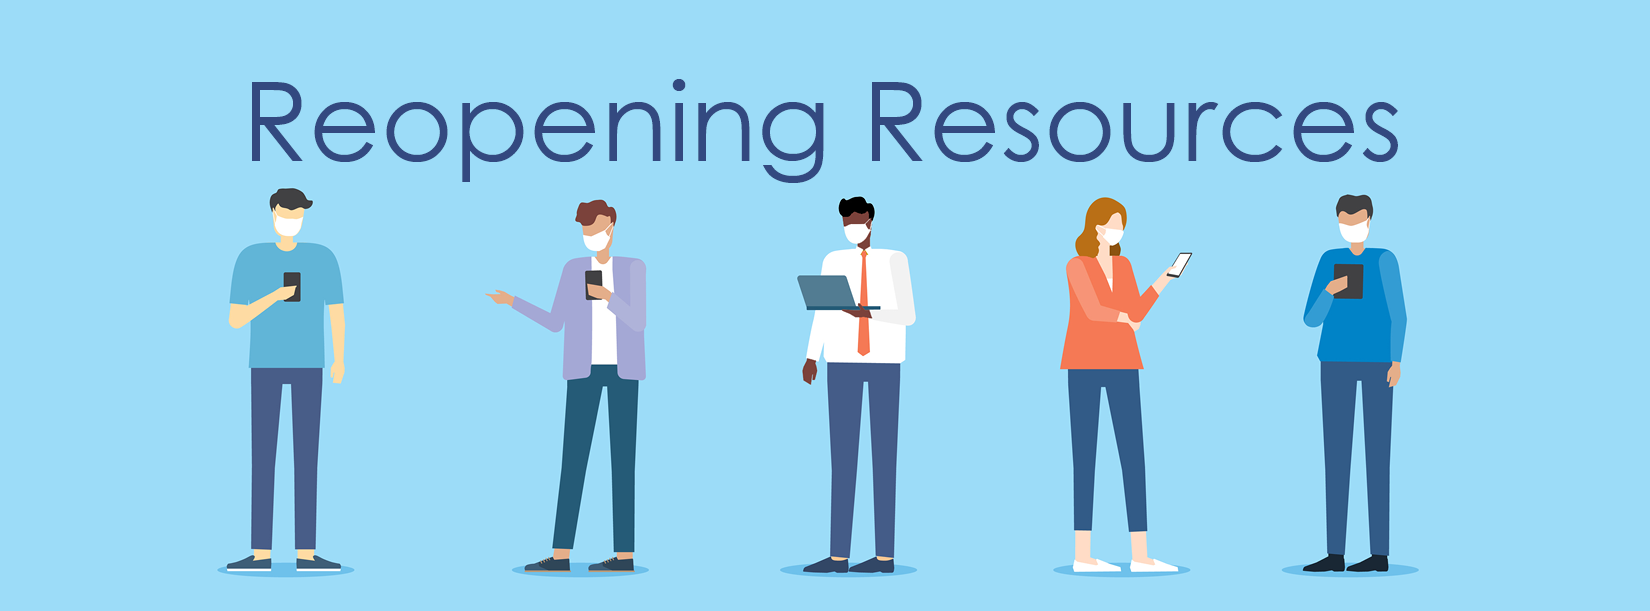 Reopening Resources  illustration with people weaing Masks